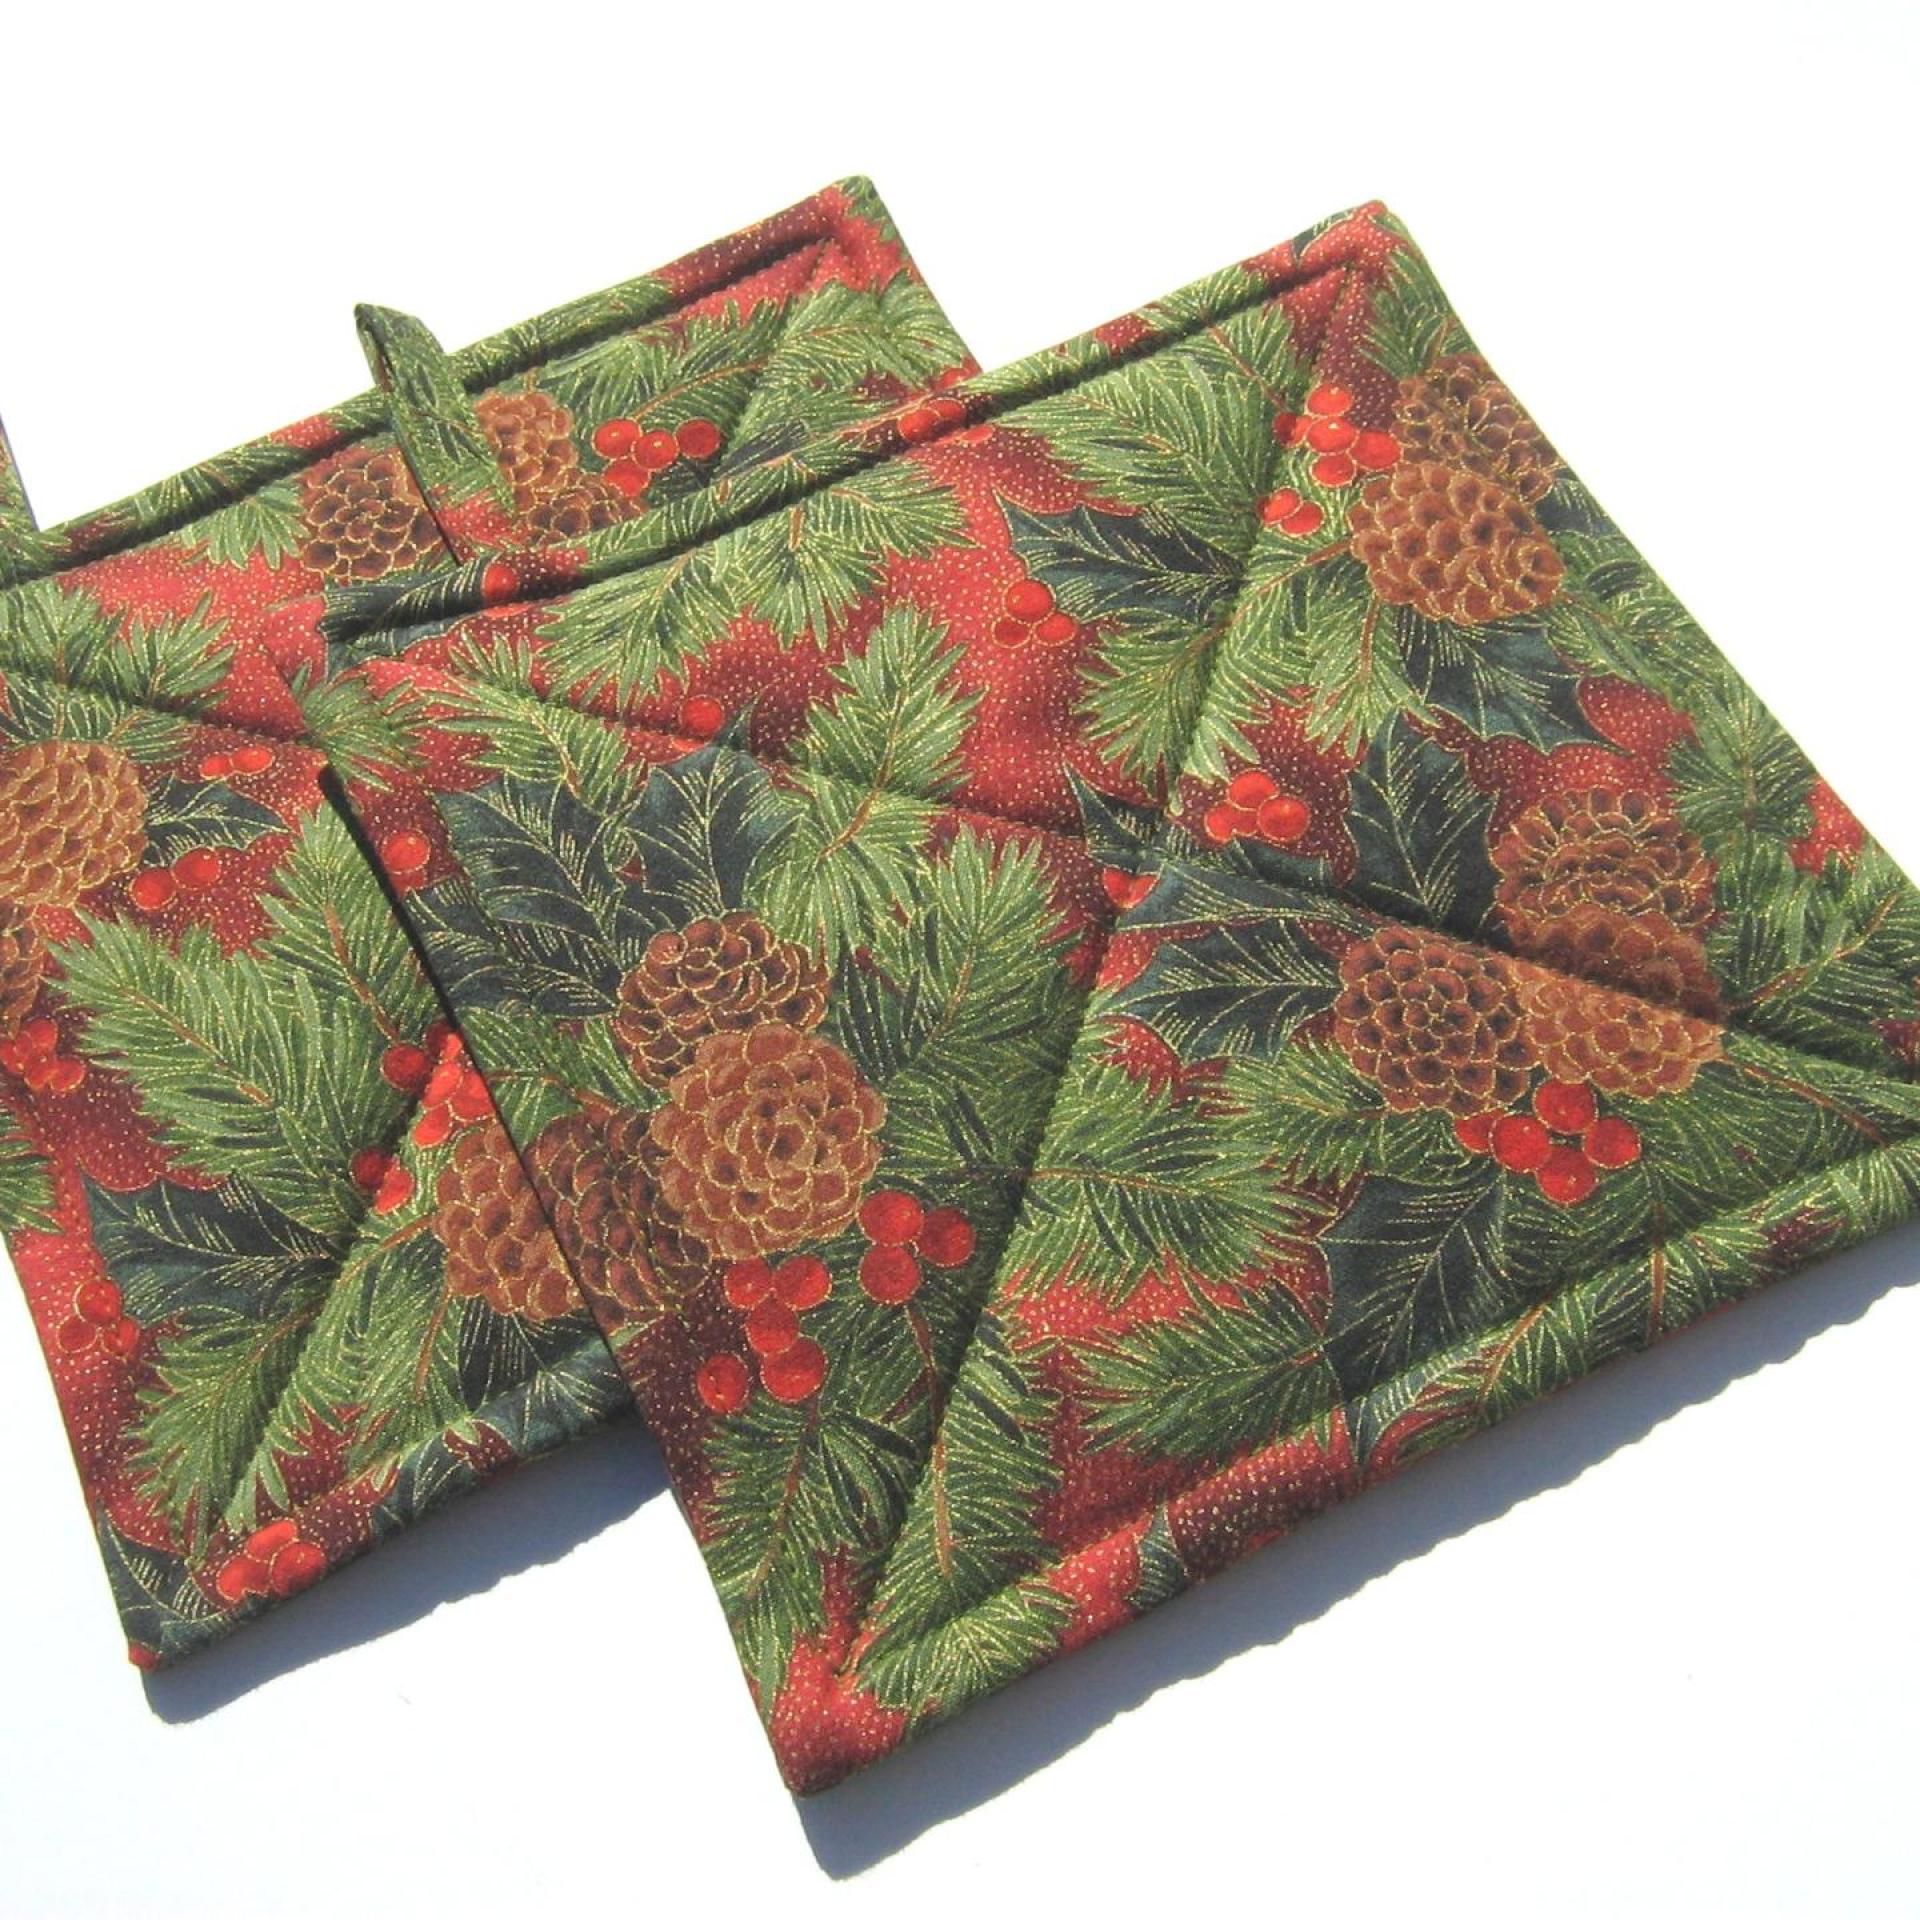 Christmas Potholders with Pine Boughs & Pinecones in Green, Brown, Red, Quilted Hot Pads, USA Made Stocking Stuffer, Housewarming, Hostess Gift